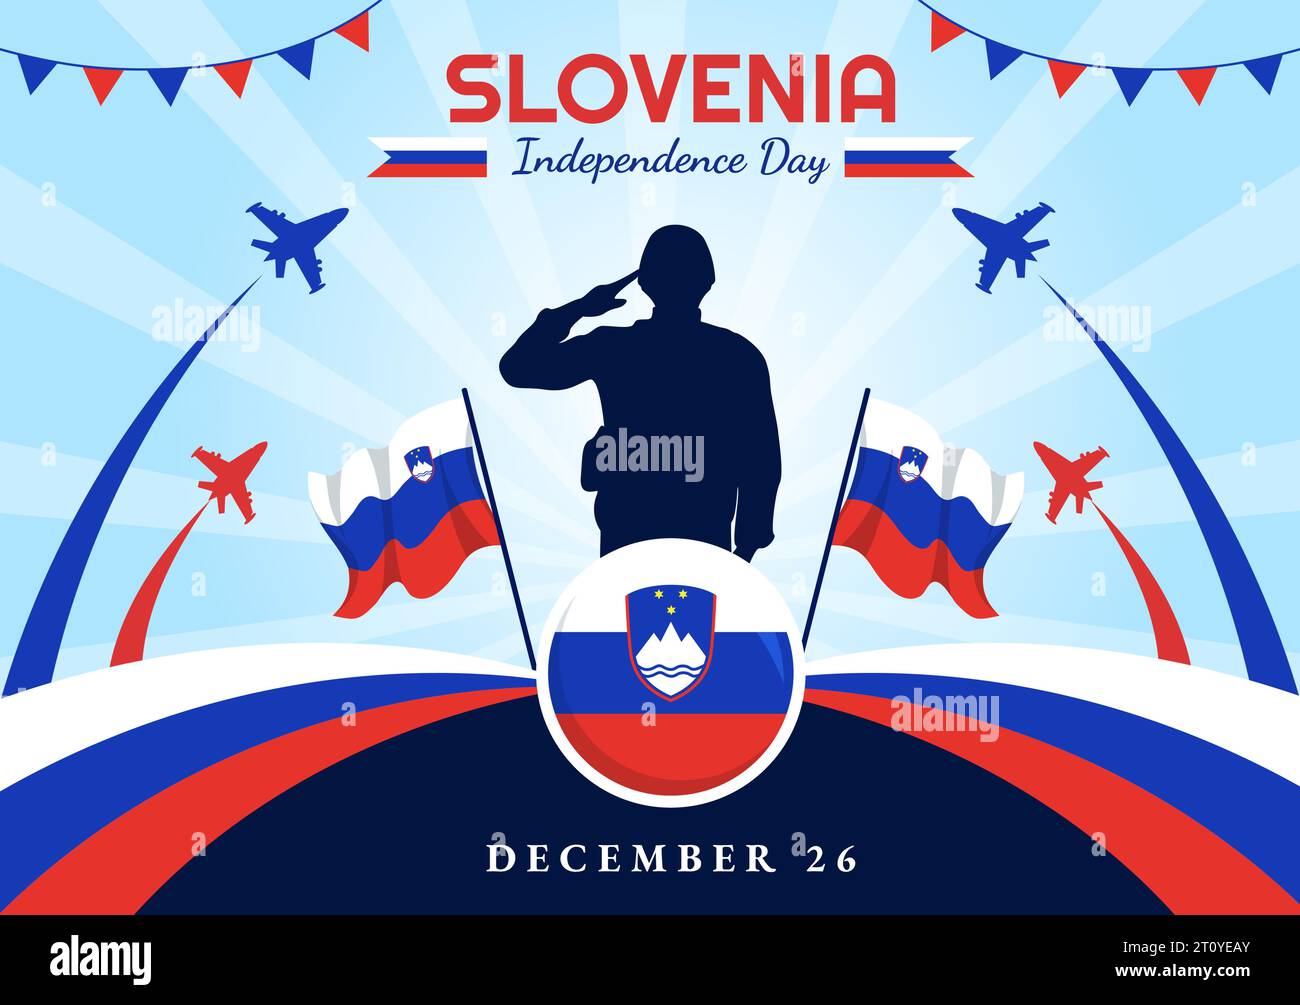 Slovenia Independence Day Vector Illustration on 26 December with Waving Flag Background Design in National Unity Holiday Celebration Flat Cartoon Stock Vector